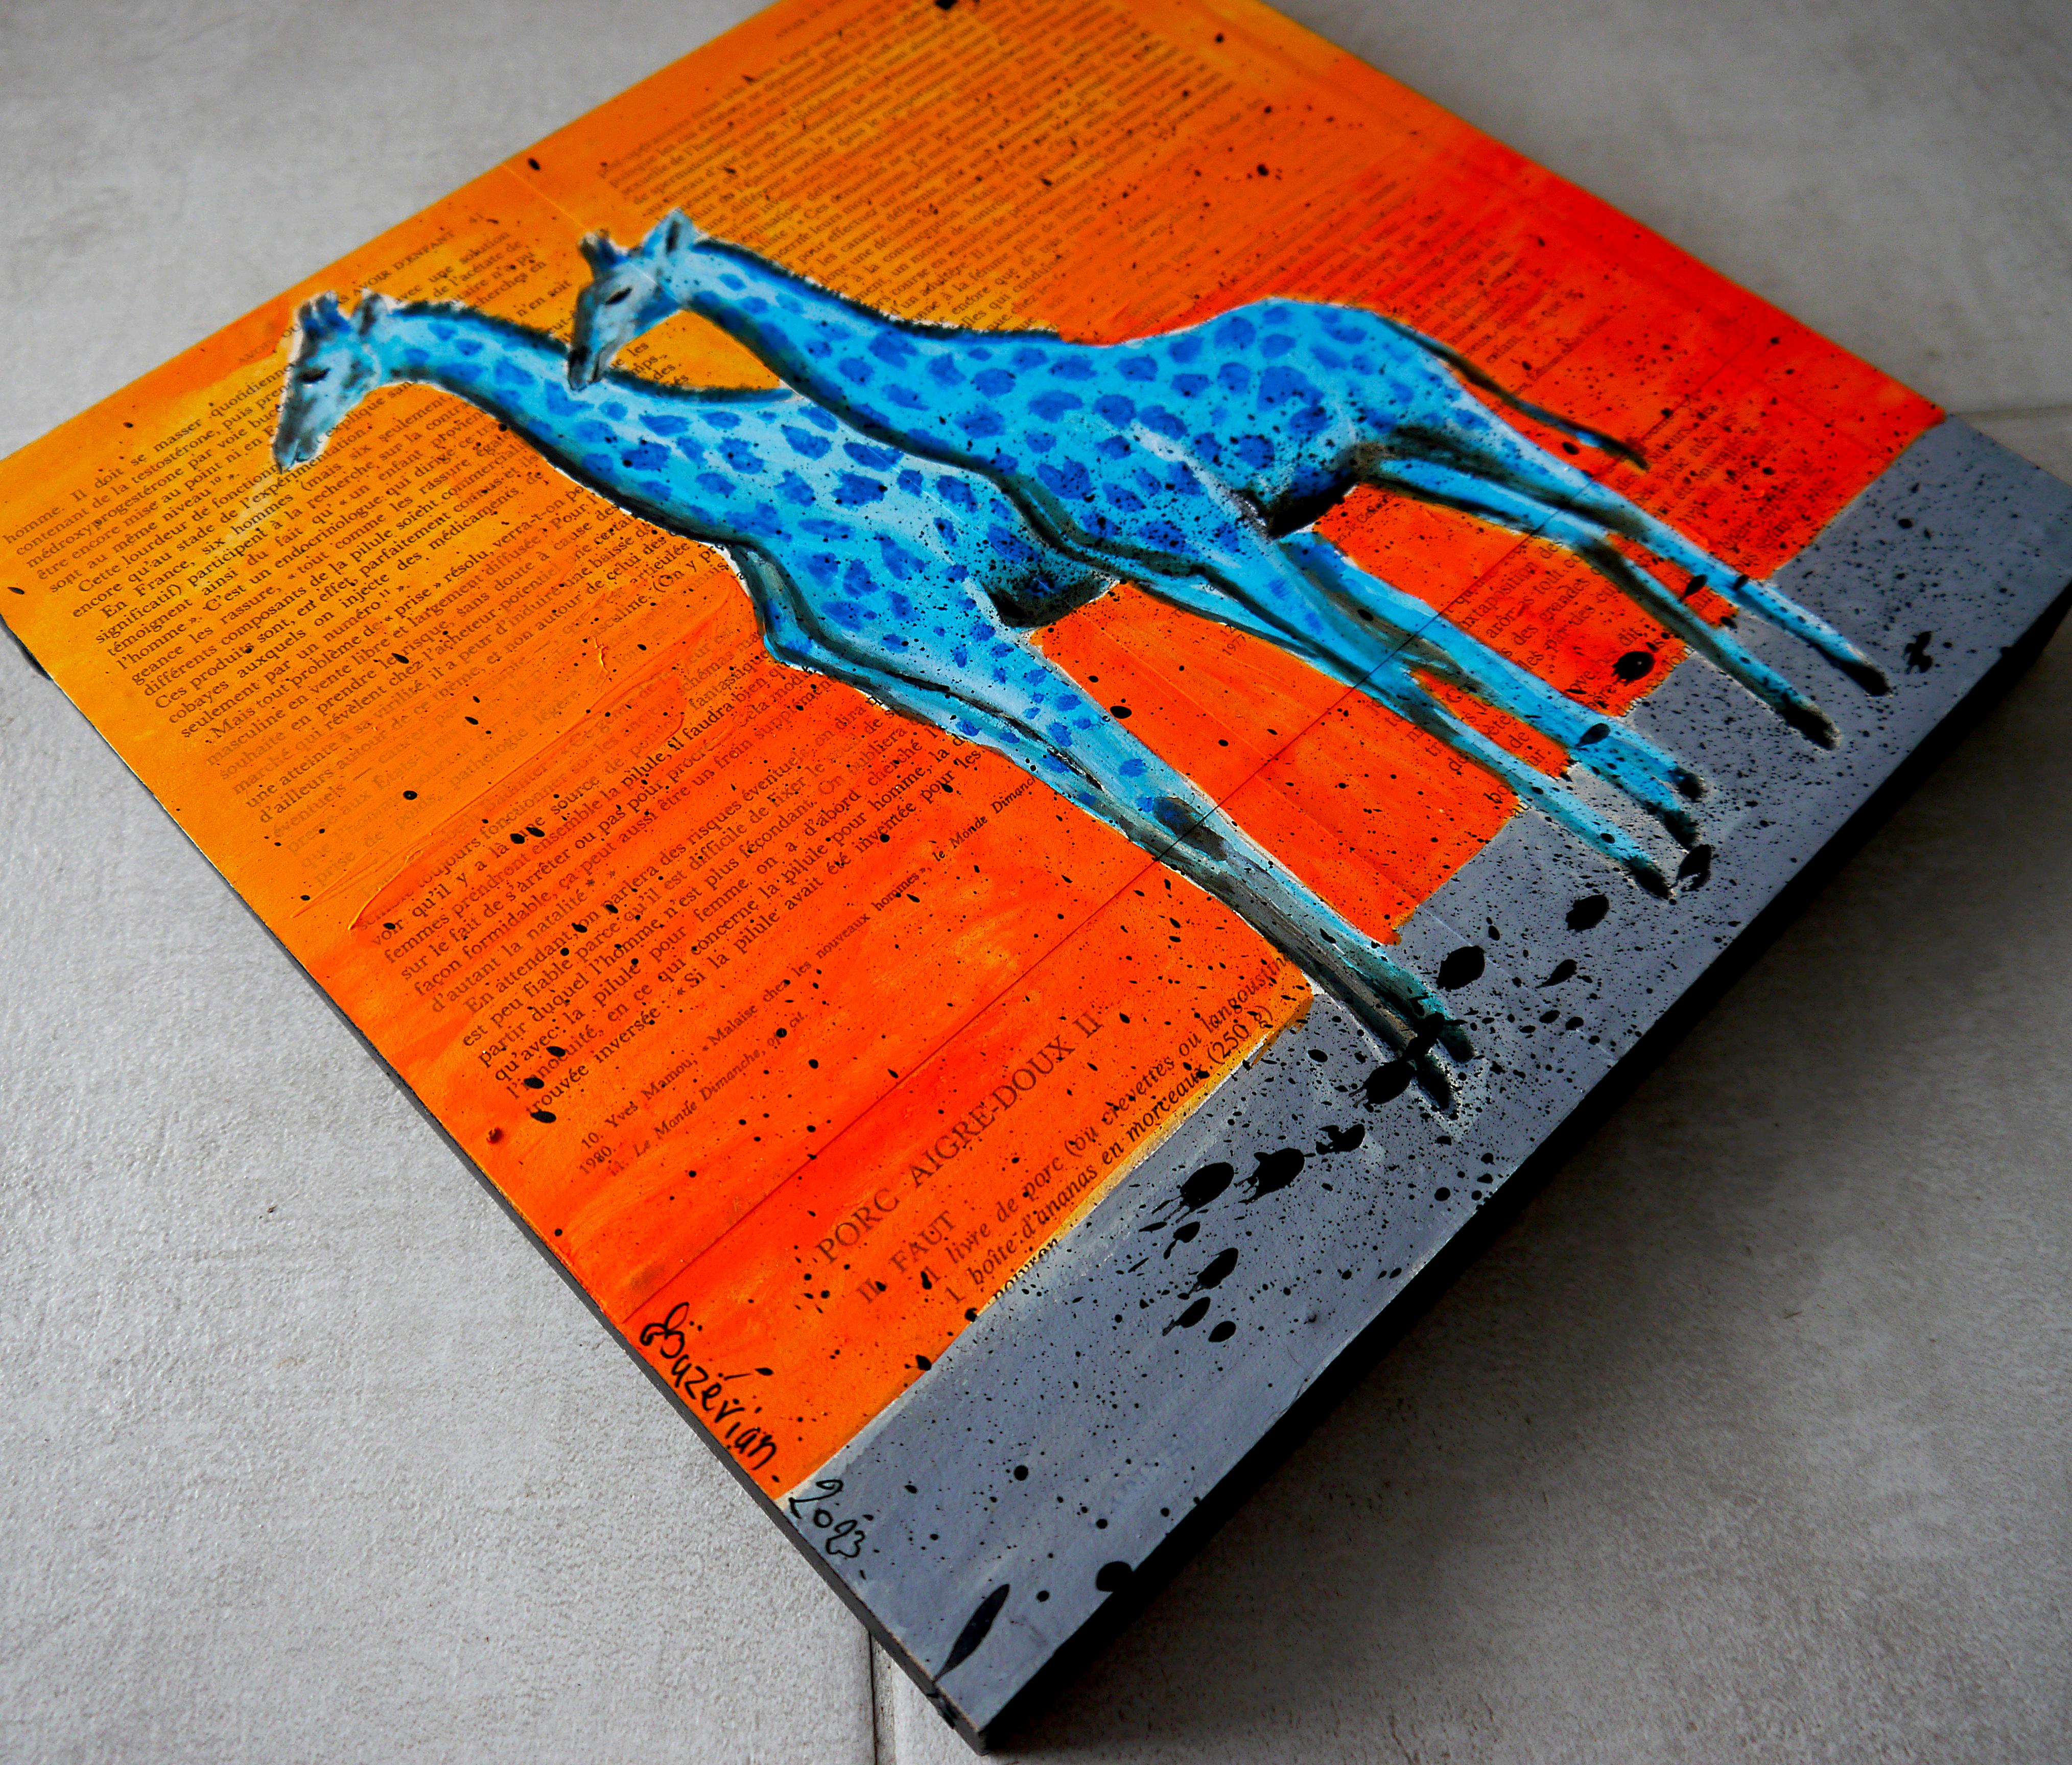 Two Blue Giraffes

Animal -  Portrait  2 blue Giraffes

Technique: oil, acrylic, and ink on old book pages on wooden frame 30x30cm ■■ 11,8x11,8 inch

Sustainability: Wooden frame is made by the artist by recycling  old books. In an ecological